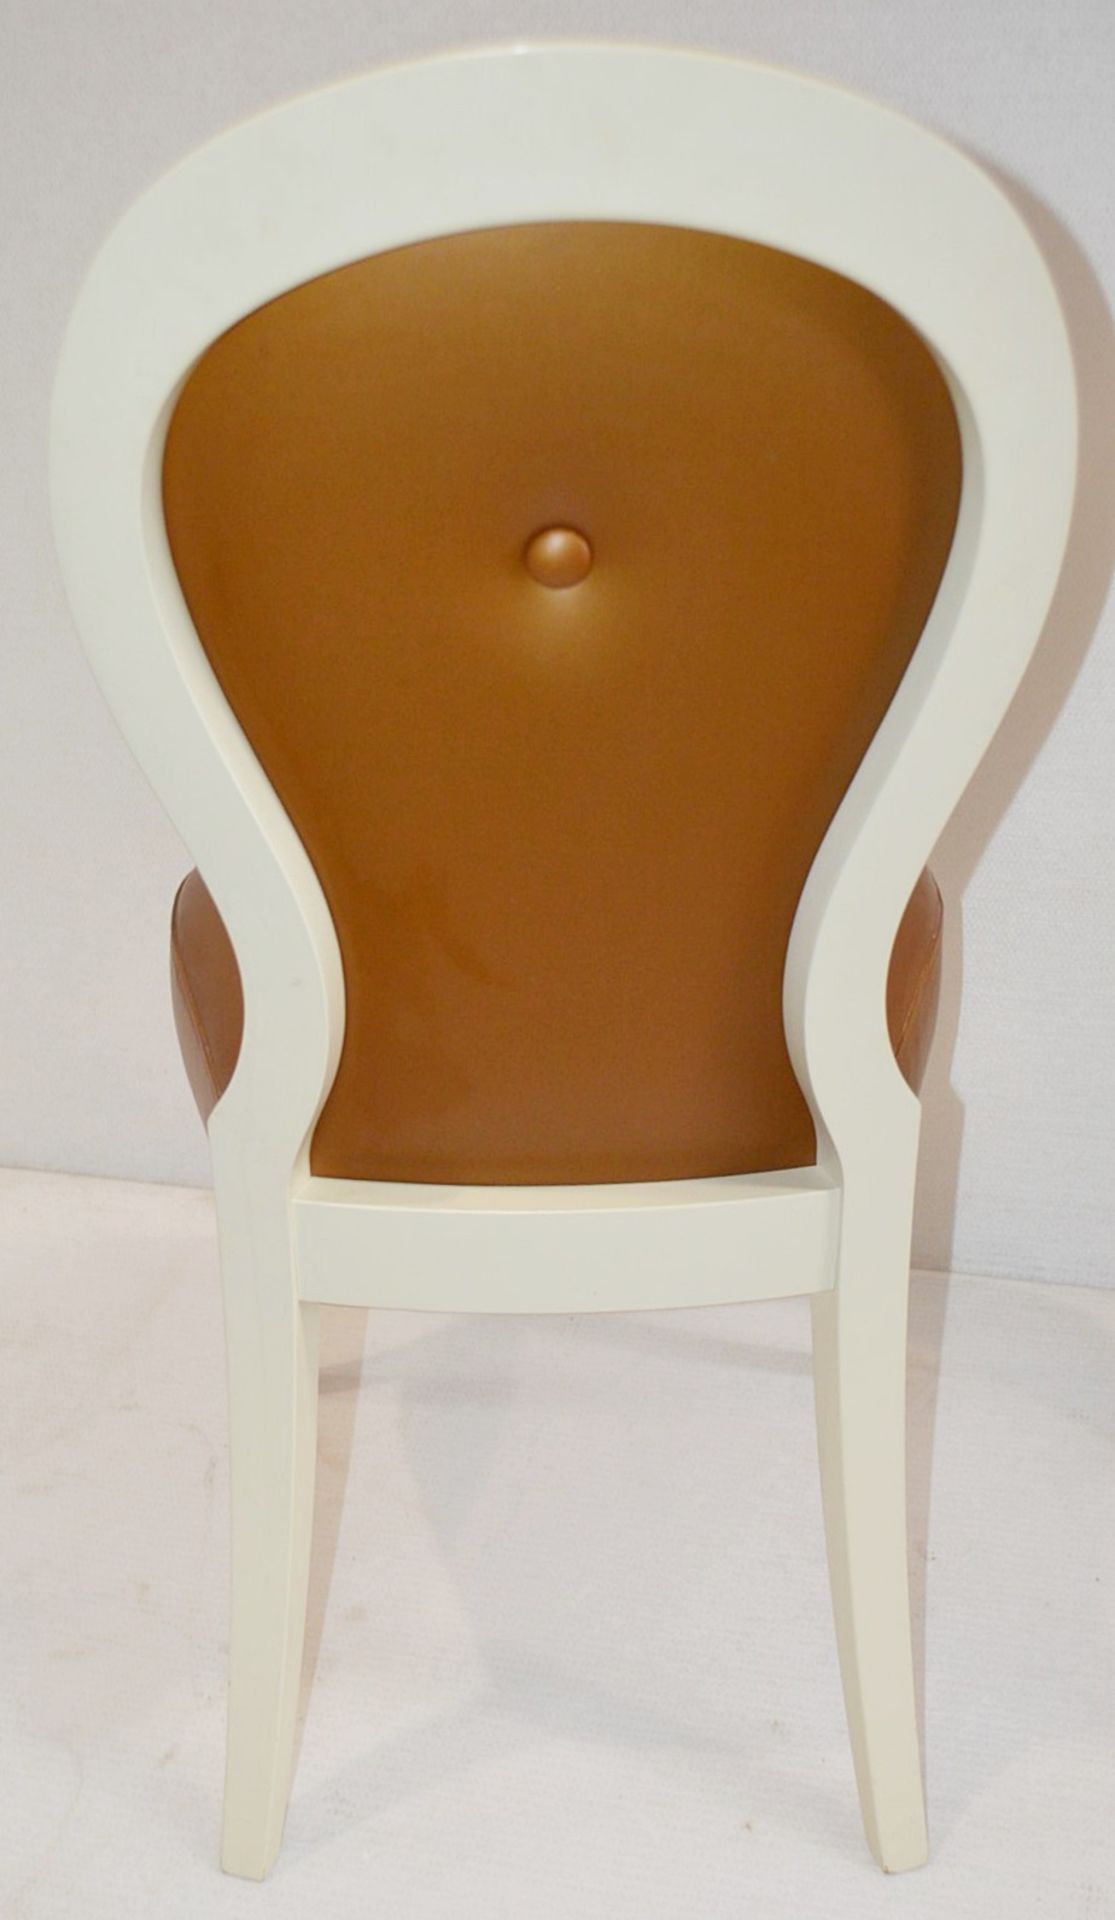 1 x Cushion Backed Chair With Curved Legs - Dimensions: H100 x W49 x D50cm / Seat 48cm - Ref: HMS128 - Image 2 of 4